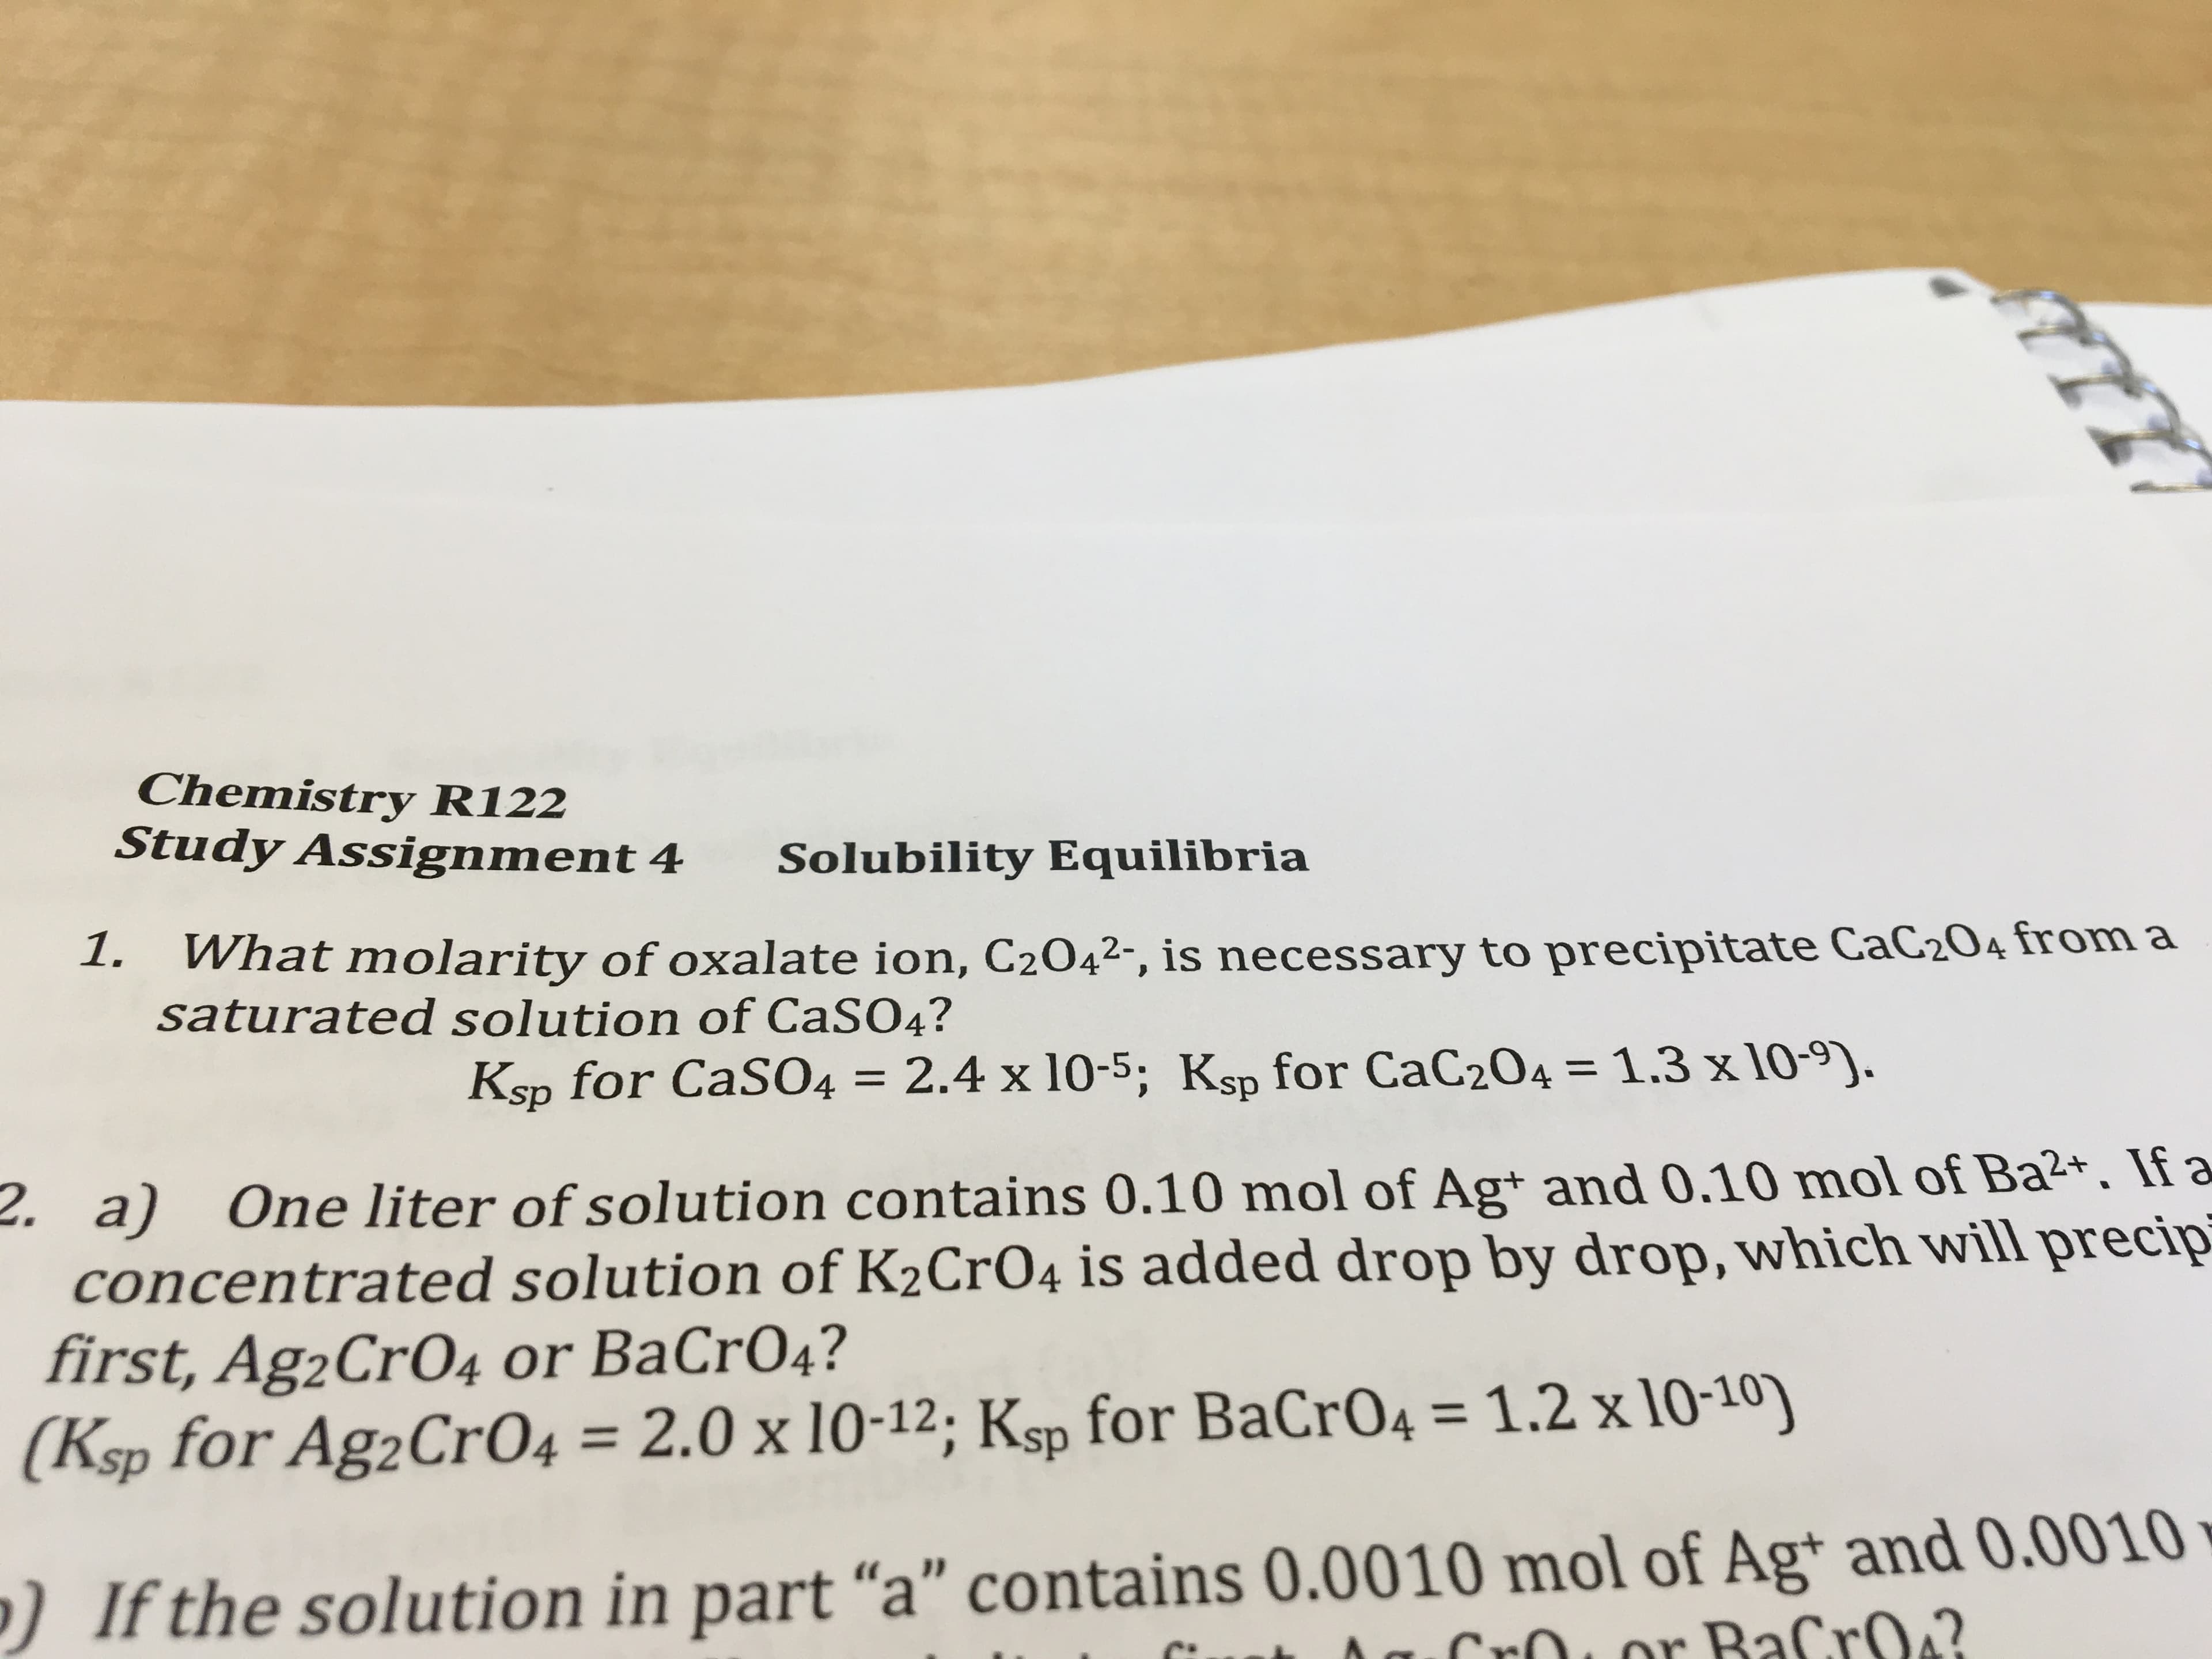 Chemistry R122
Study Assignment 4
Solubility Equilibria
What molarity of oxalate ion, C2042-, is necessary to precipitate CaC204 from a
saturated solution of CaSO4?
1.
4 = 2.4 x 10-5; Ksp for CaC204 = 1.3 x 10-9).
for CaSO4
%3D
Ksp
2. a) One liter of solution contains 0.10 mol of Ag+ and 0.10 mol of Ba2+. If a
concentrated solution of K2CrO4 is added drop by drop, which will precip
first, Ag2Cr04 or BaCrO4?
(Ksp for Ag2CrO4 = 2.0 x 10-12; Ksp for BaCrO4 = 1.2 x 10-10)
%3D
%3D
)If the solution in part “a" contains 0.0010 mol of Ag* and 0.0010
Lor BaCro?
Cr
